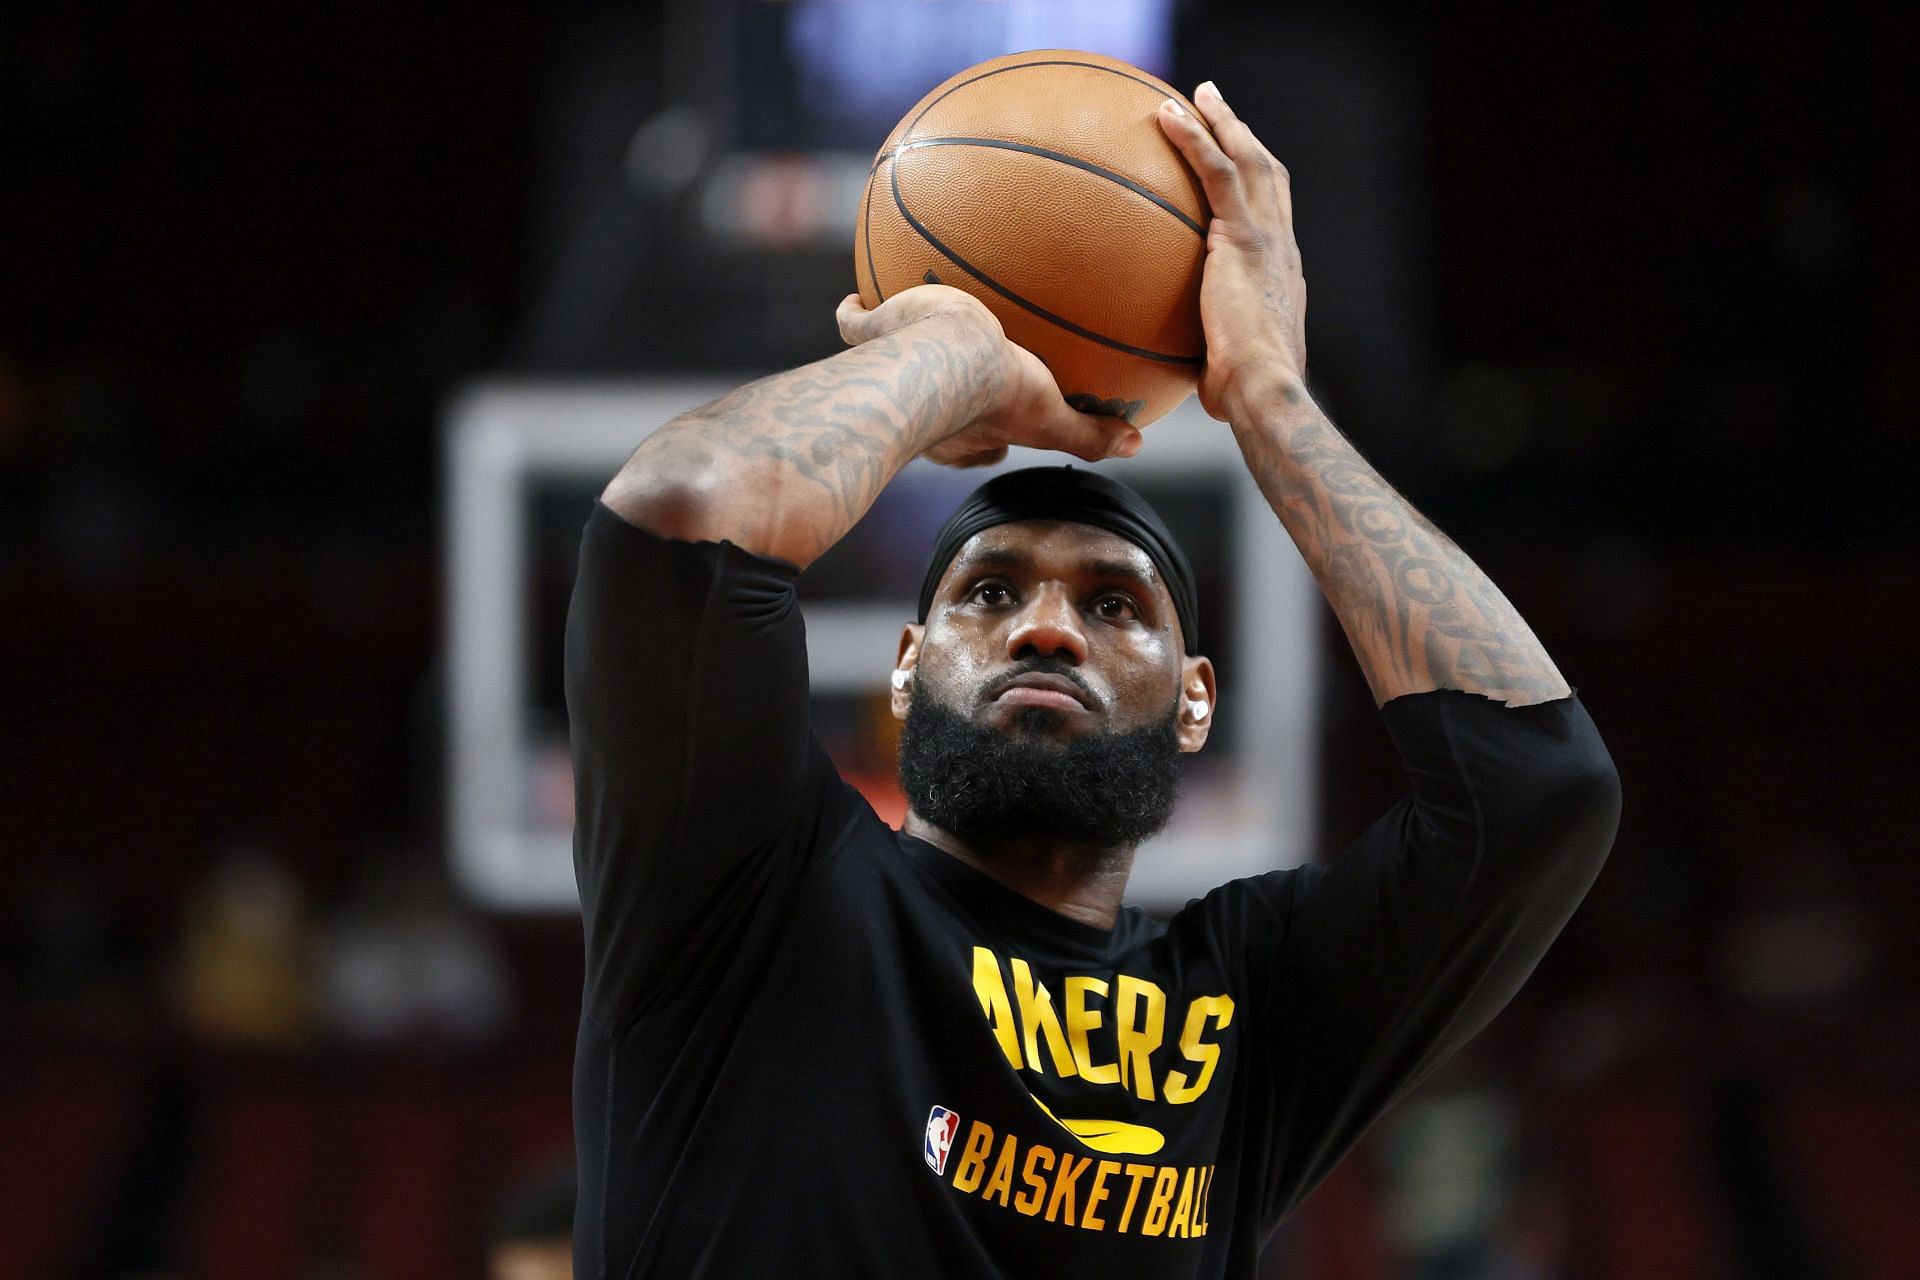 LeBron James of the LA Lakers warms up pre-game